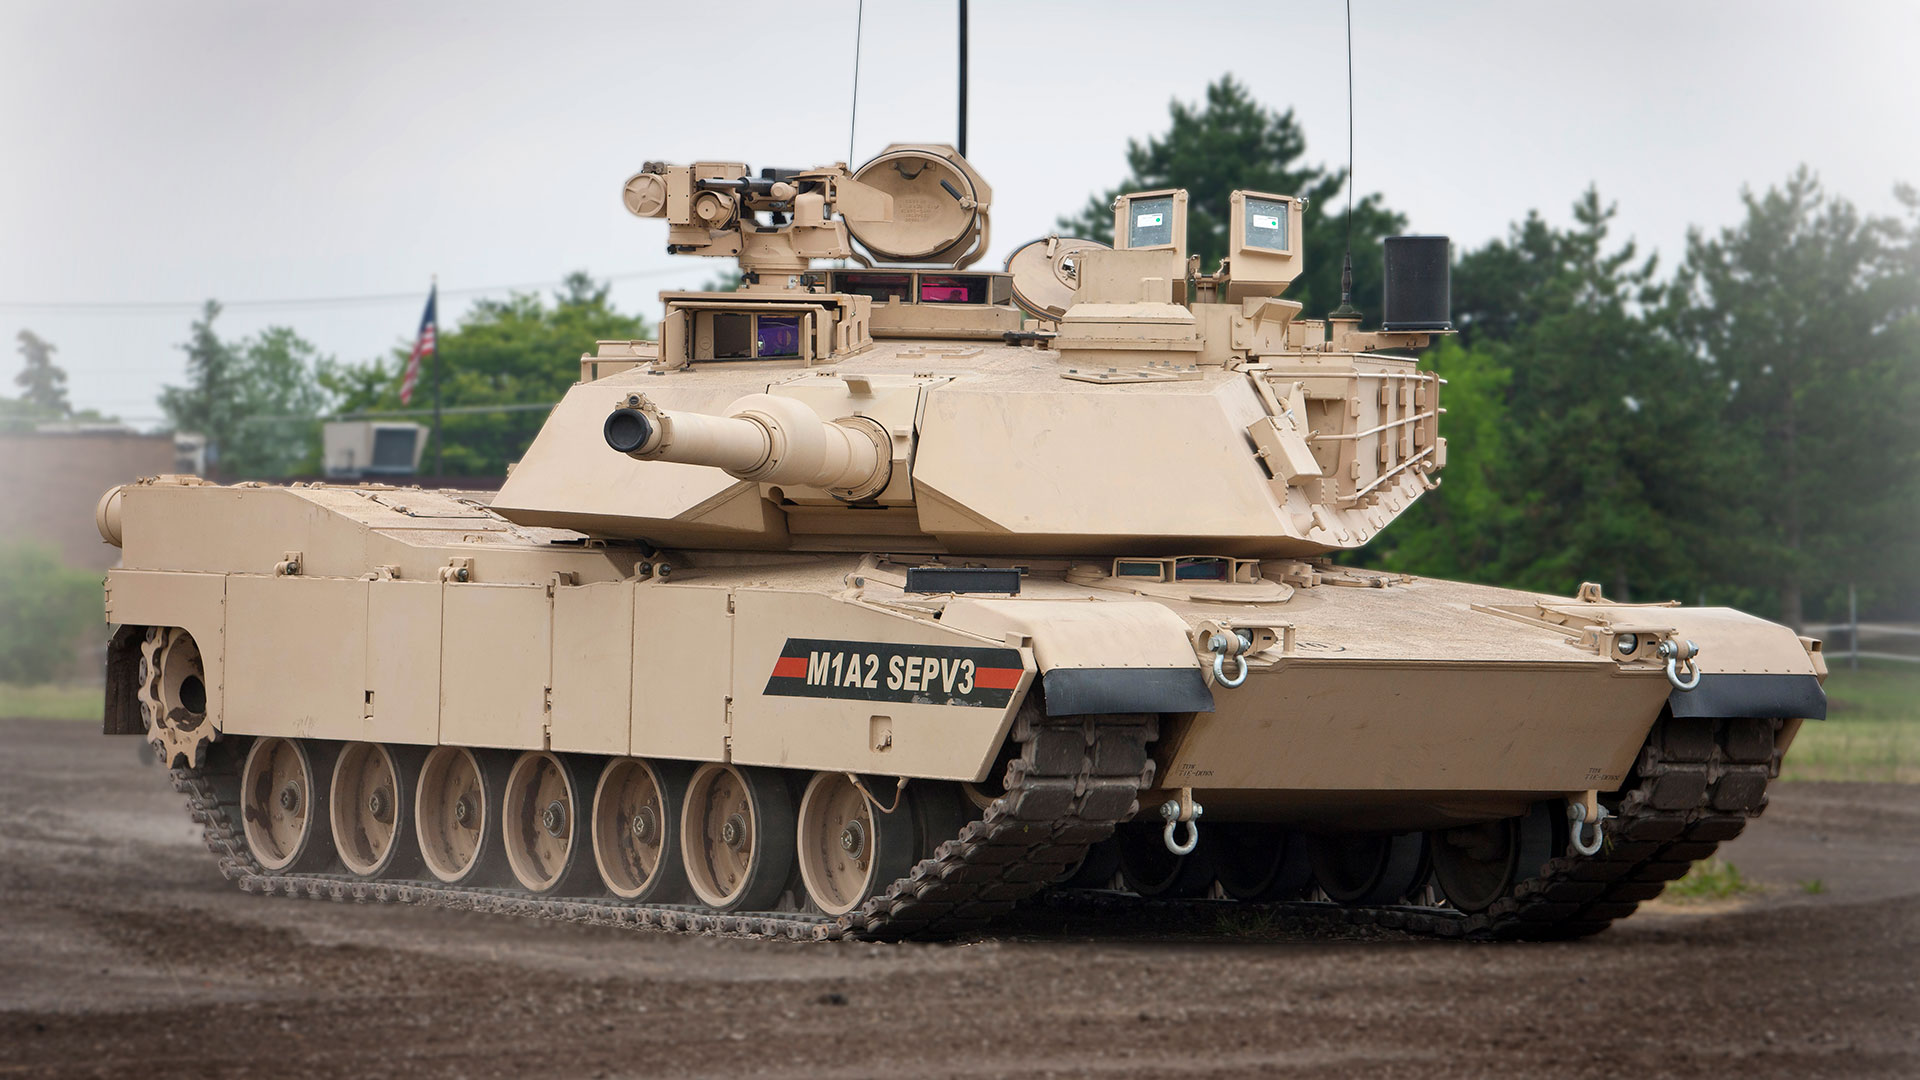 Collins Aerospace brings proven, more electric aerospace technologies to Abrams M1A2 with new generator to help enhance survivability, reliability